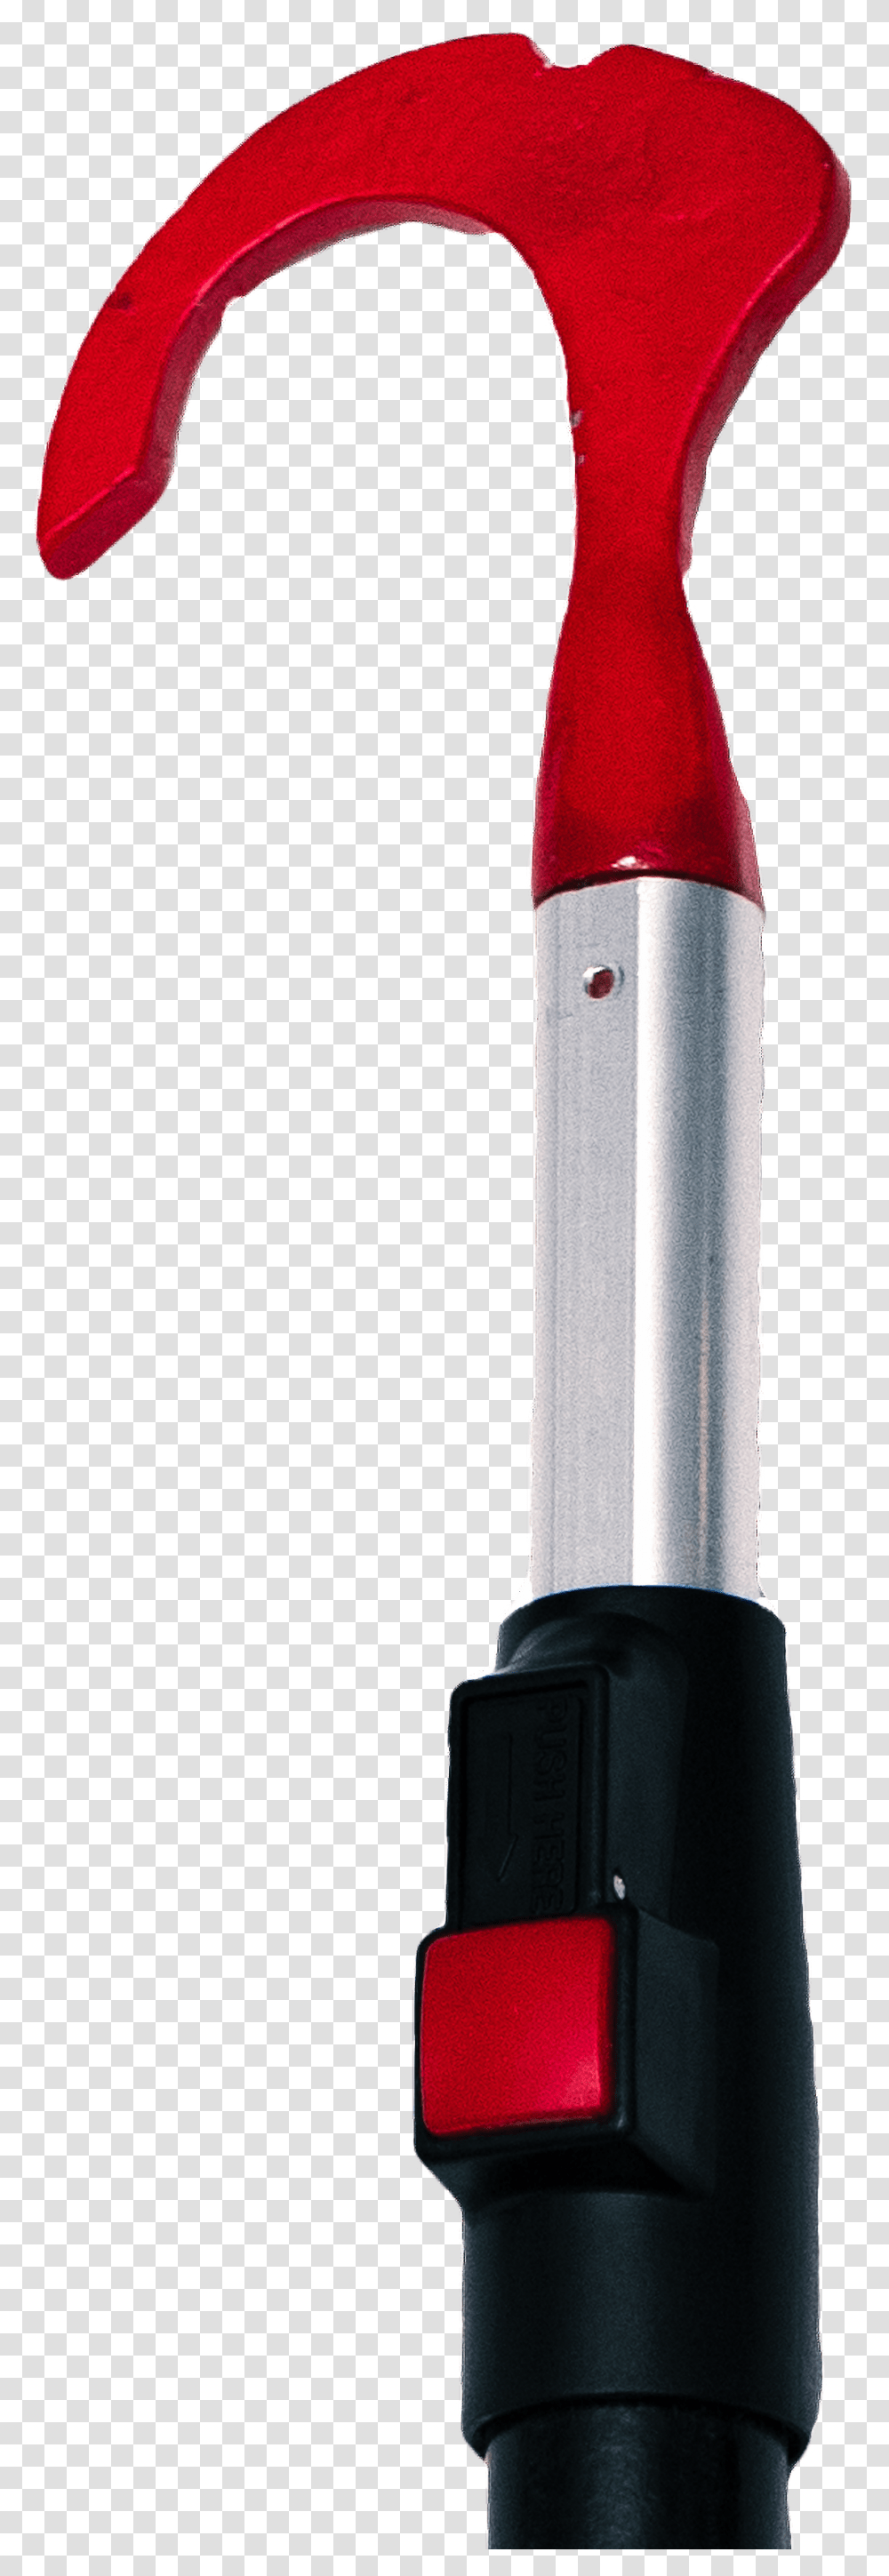 Garden Tool, Hammer, Lamp, Cylinder, Architecture Transparent Png